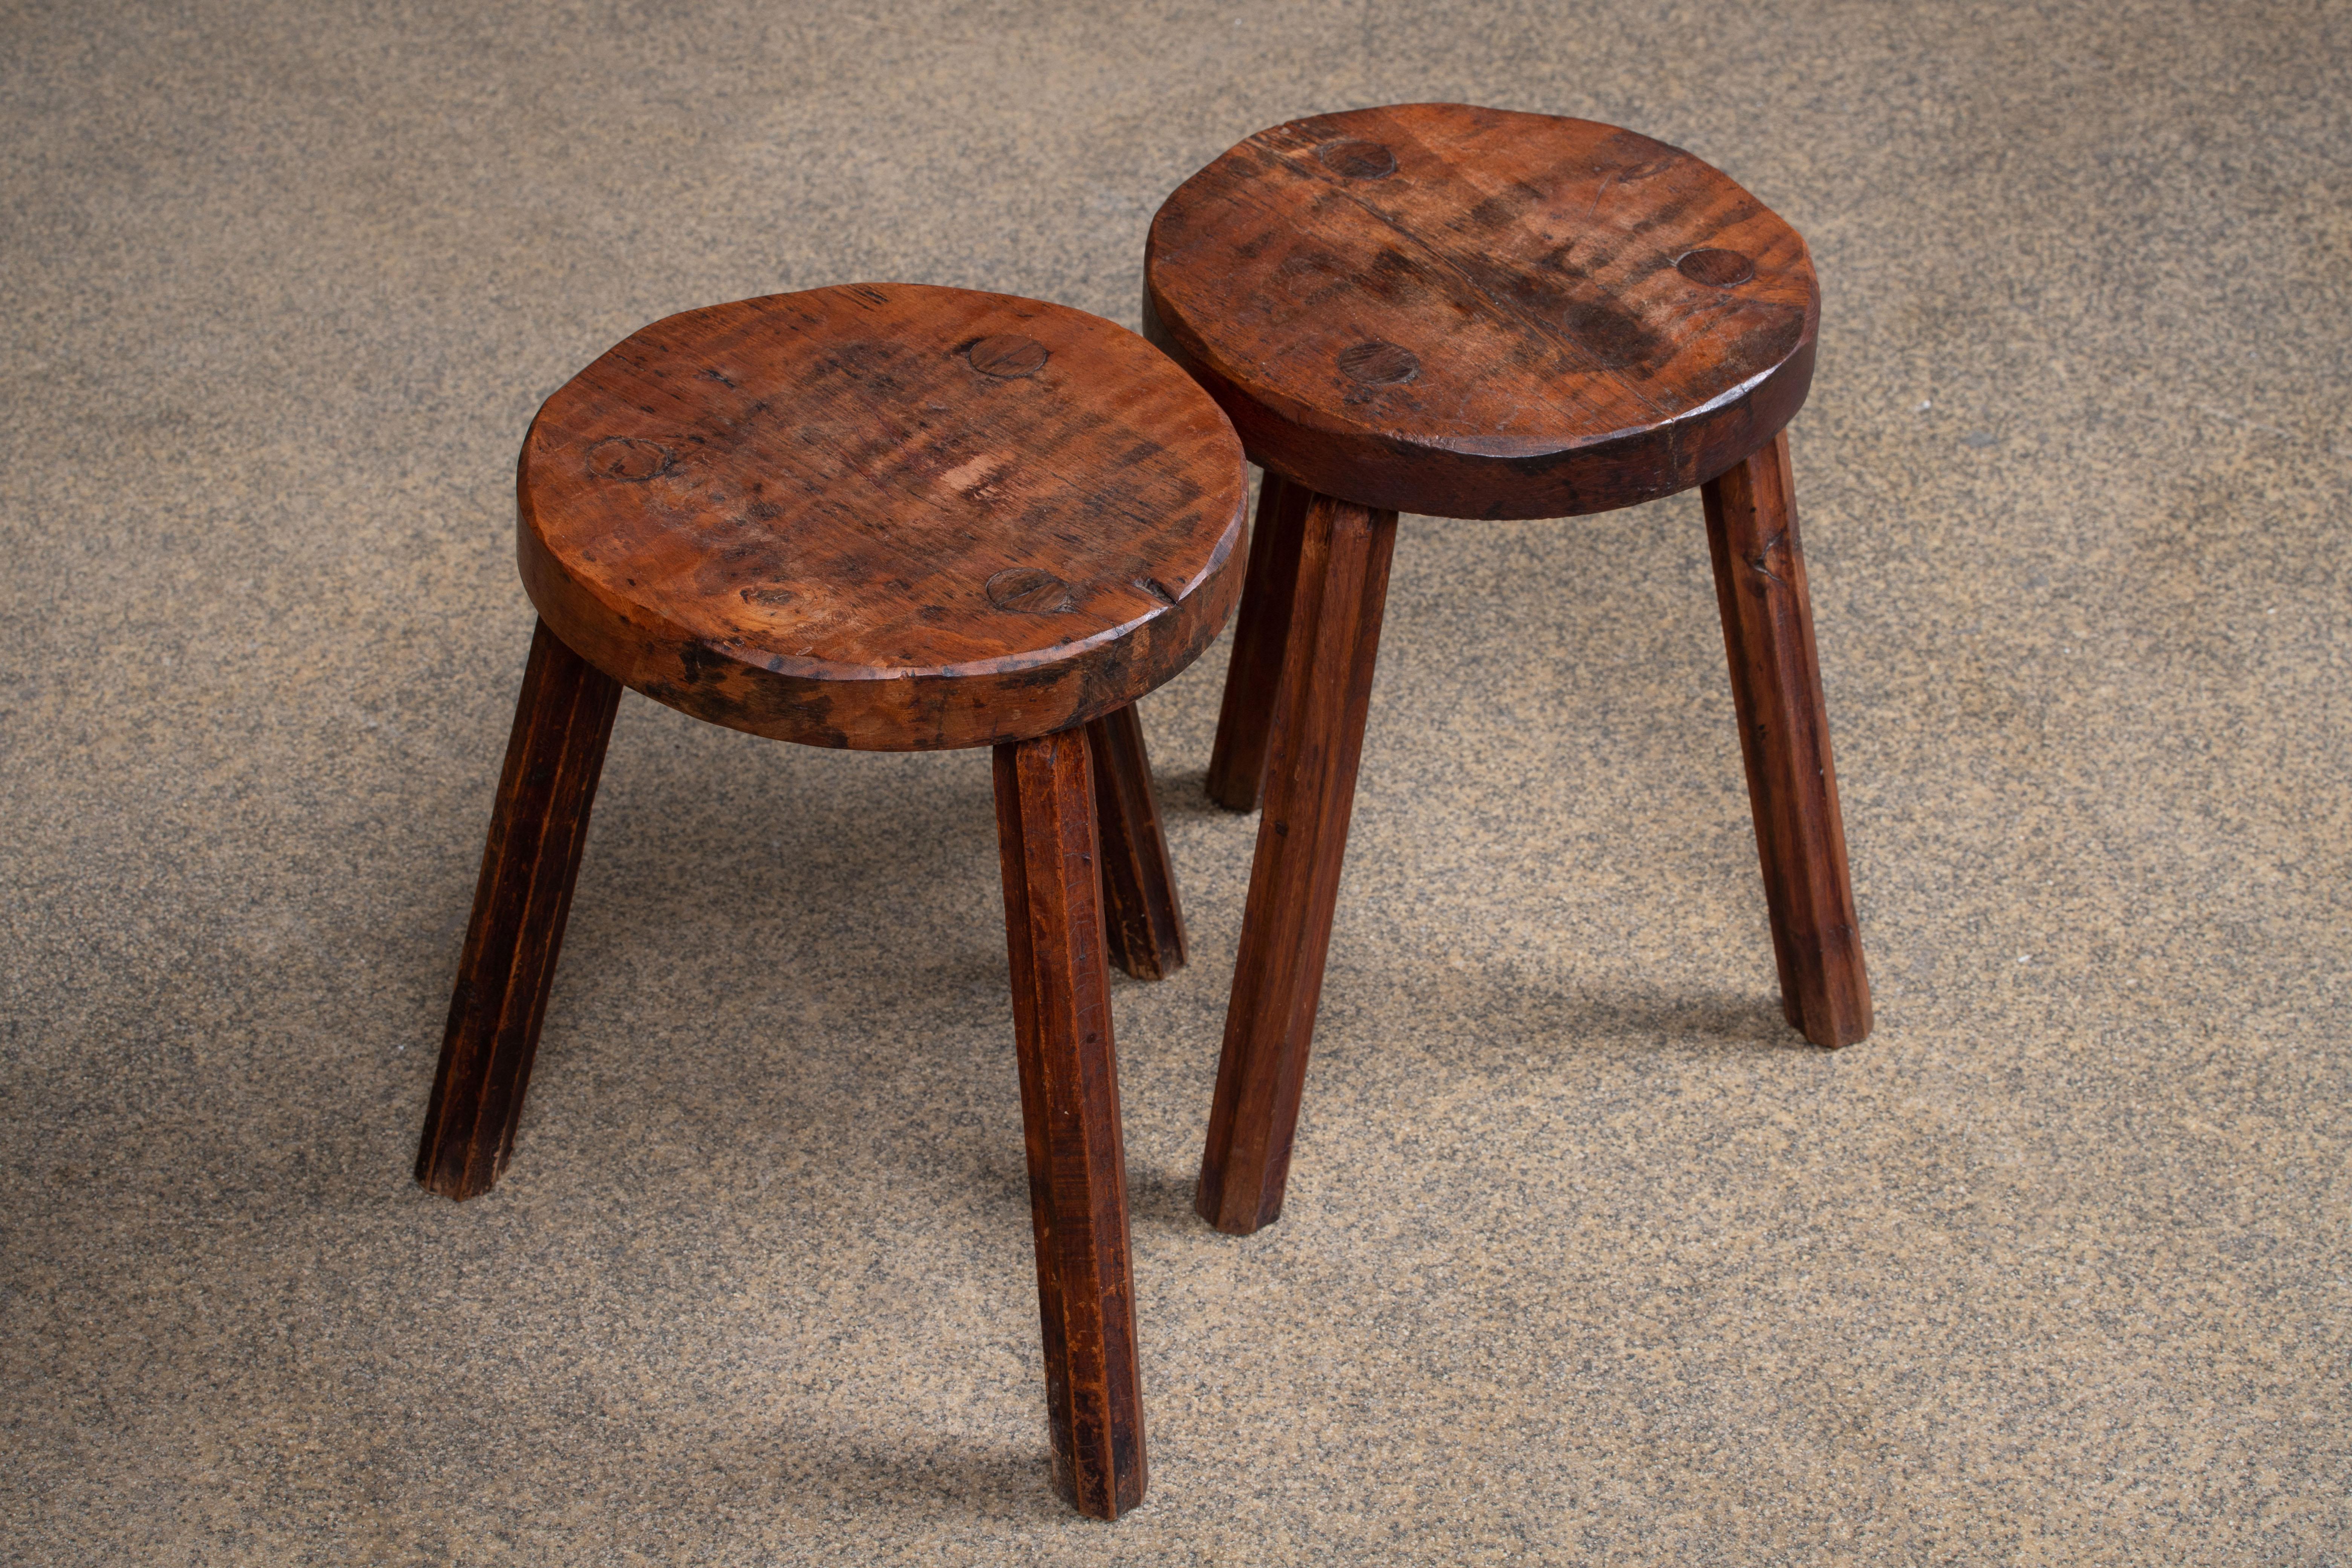 Hand-Carved French Brutalist Tripod Stool, a Pair